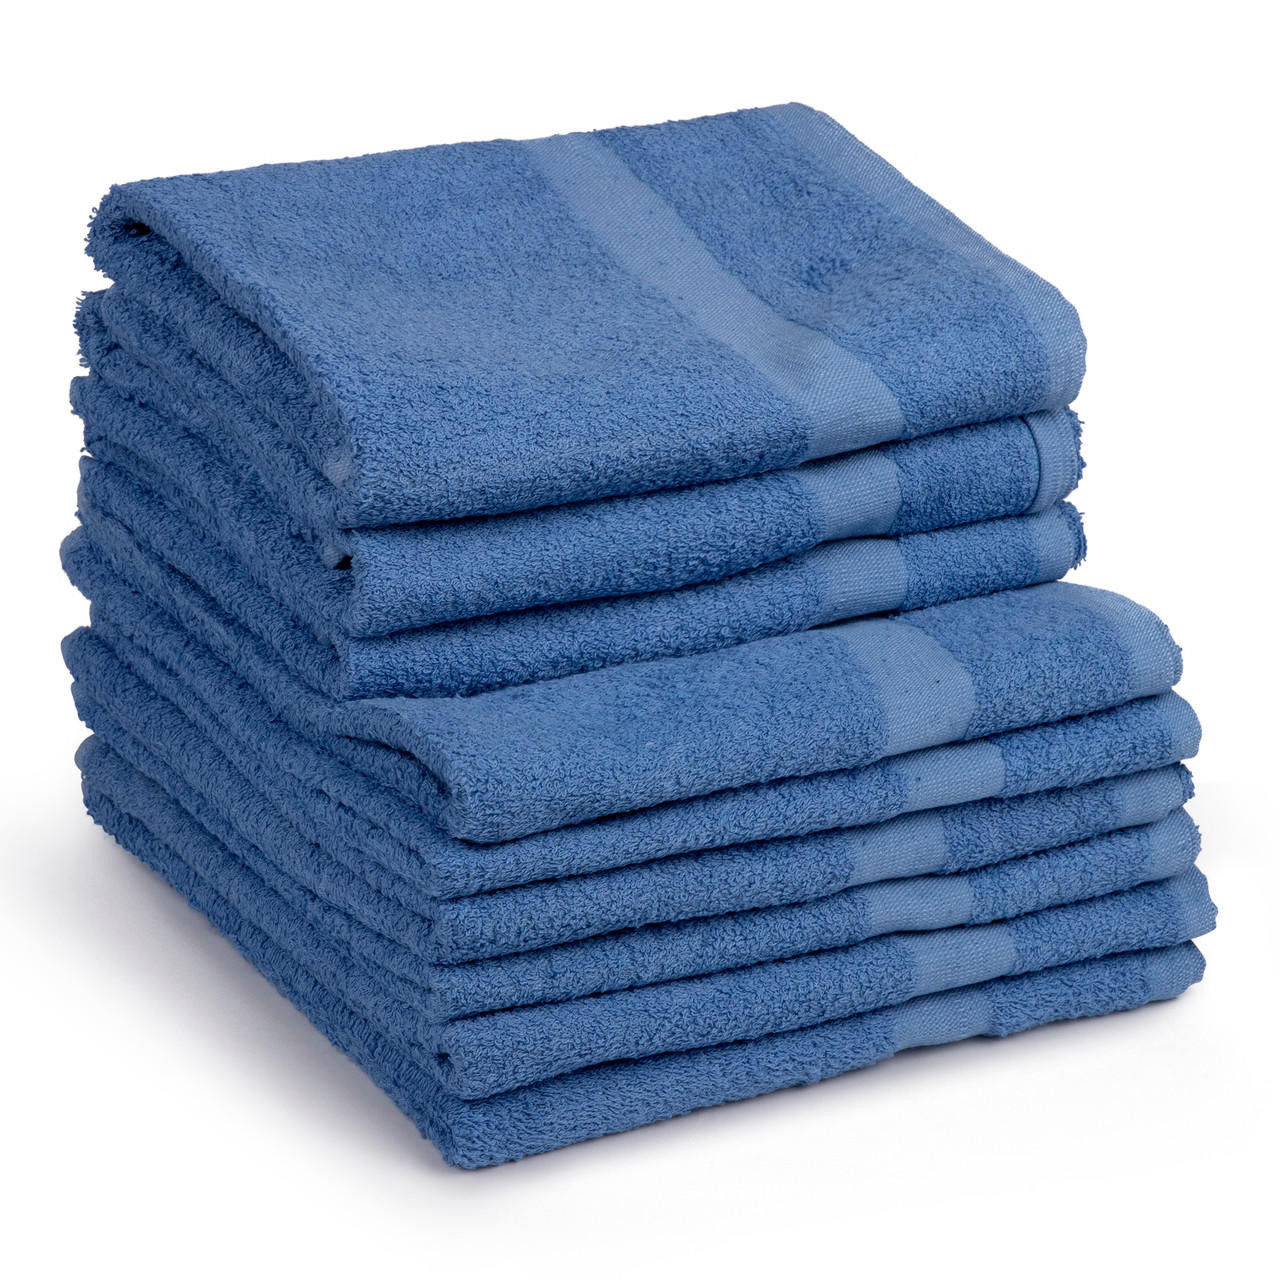 What blue washcloths in bulk are included in the Blue Towel Collection, 16s?